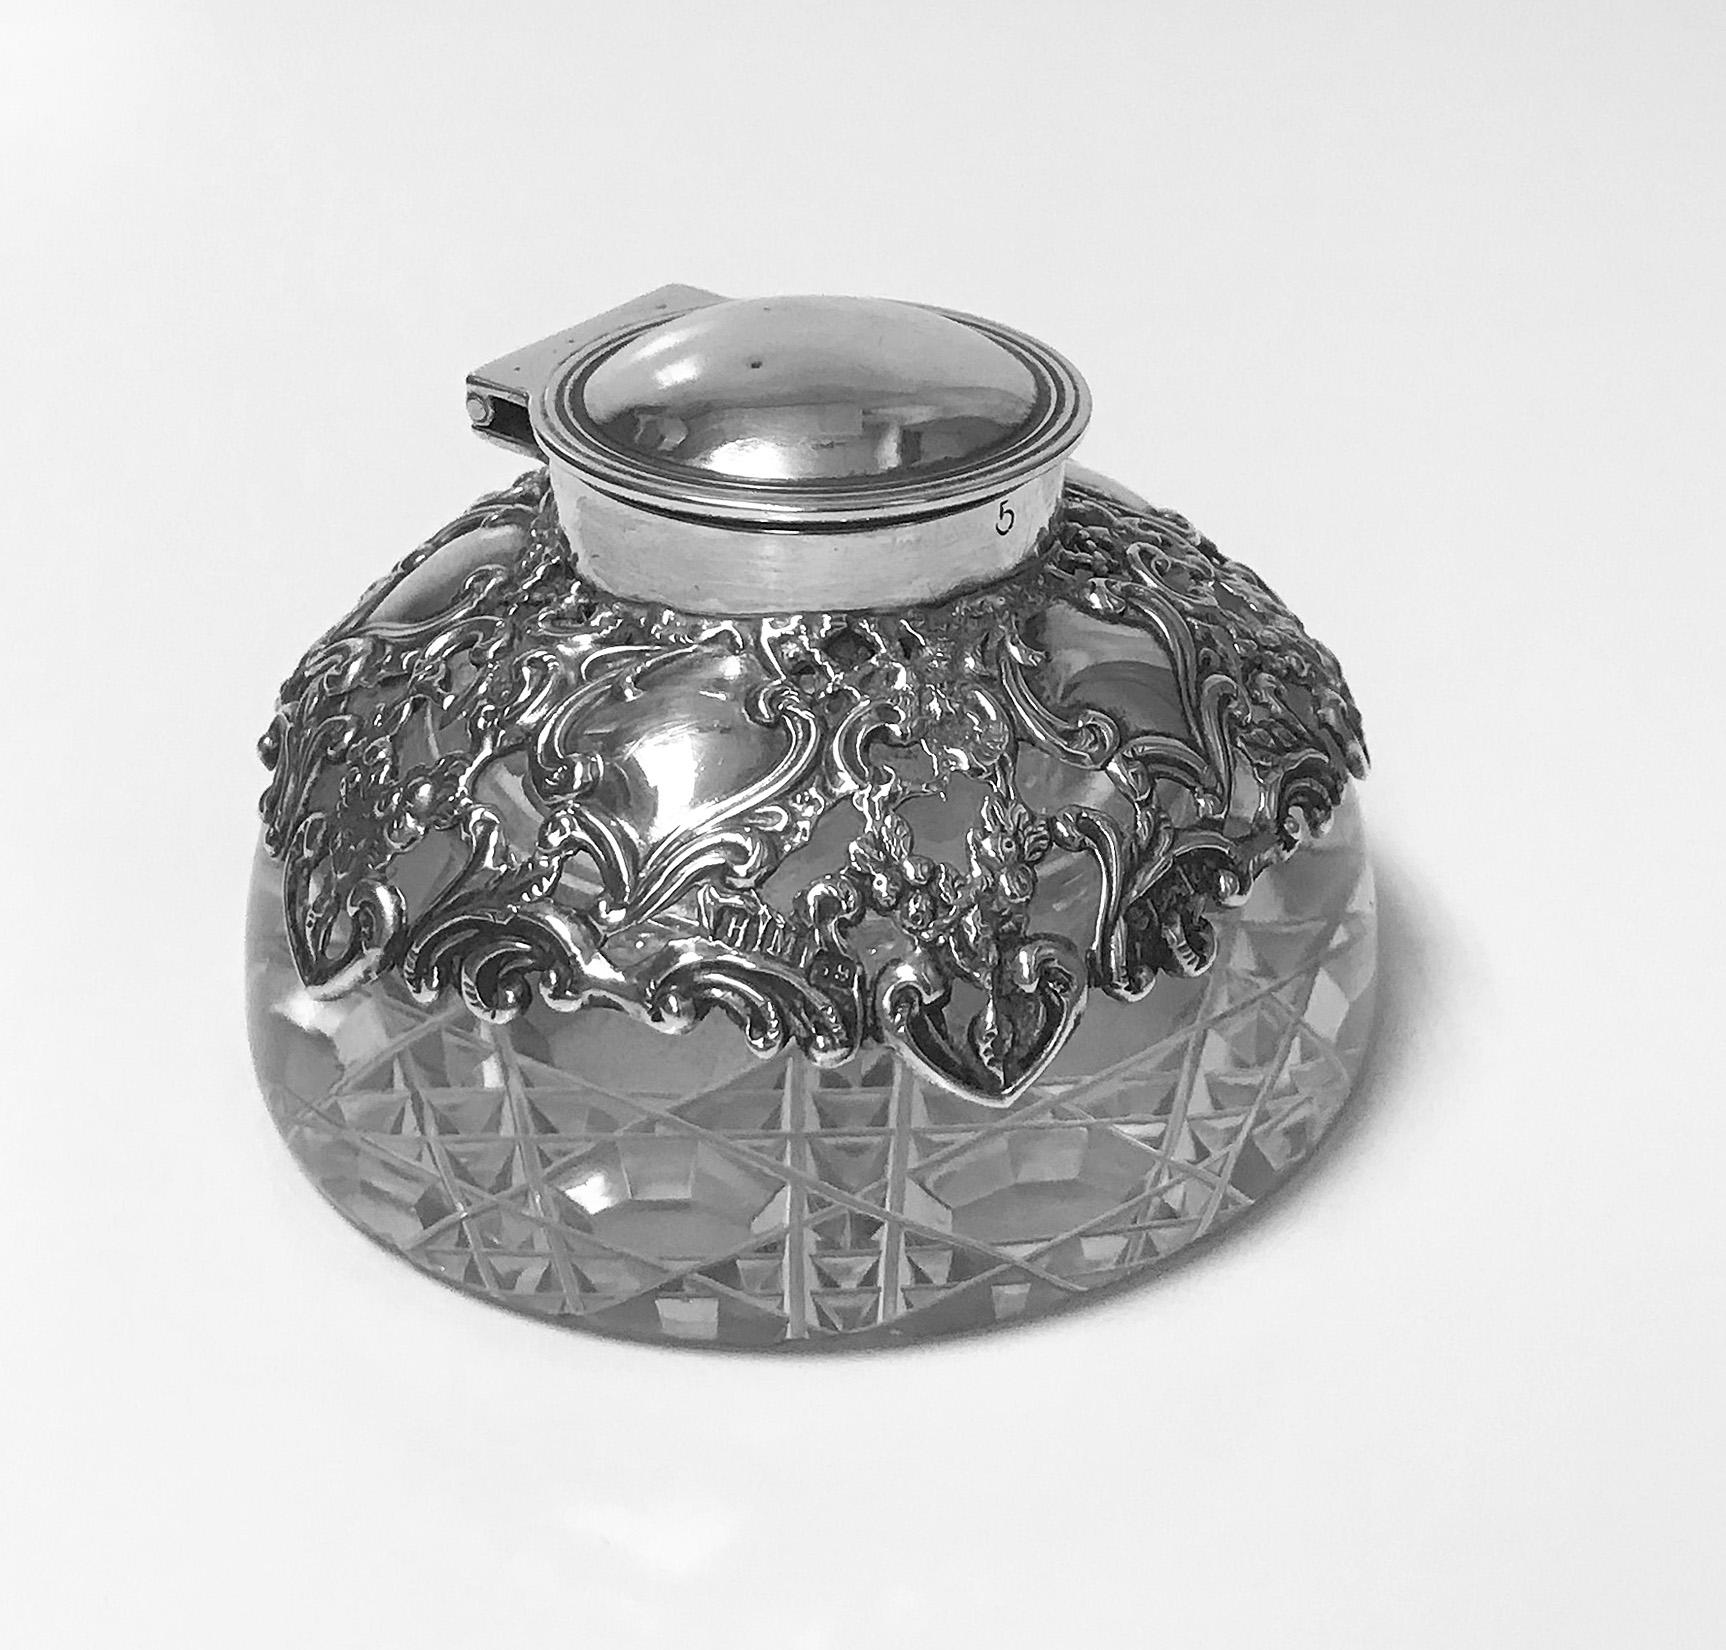 Antique silver and glass inkwell paperweight, Birmingham, 1900 H. Matthews. The inkwell with pierced foliage and vacant cartouche silver decoration, plain hinged thread surround cover all on plain glass body with unusual octagonal and diamond square